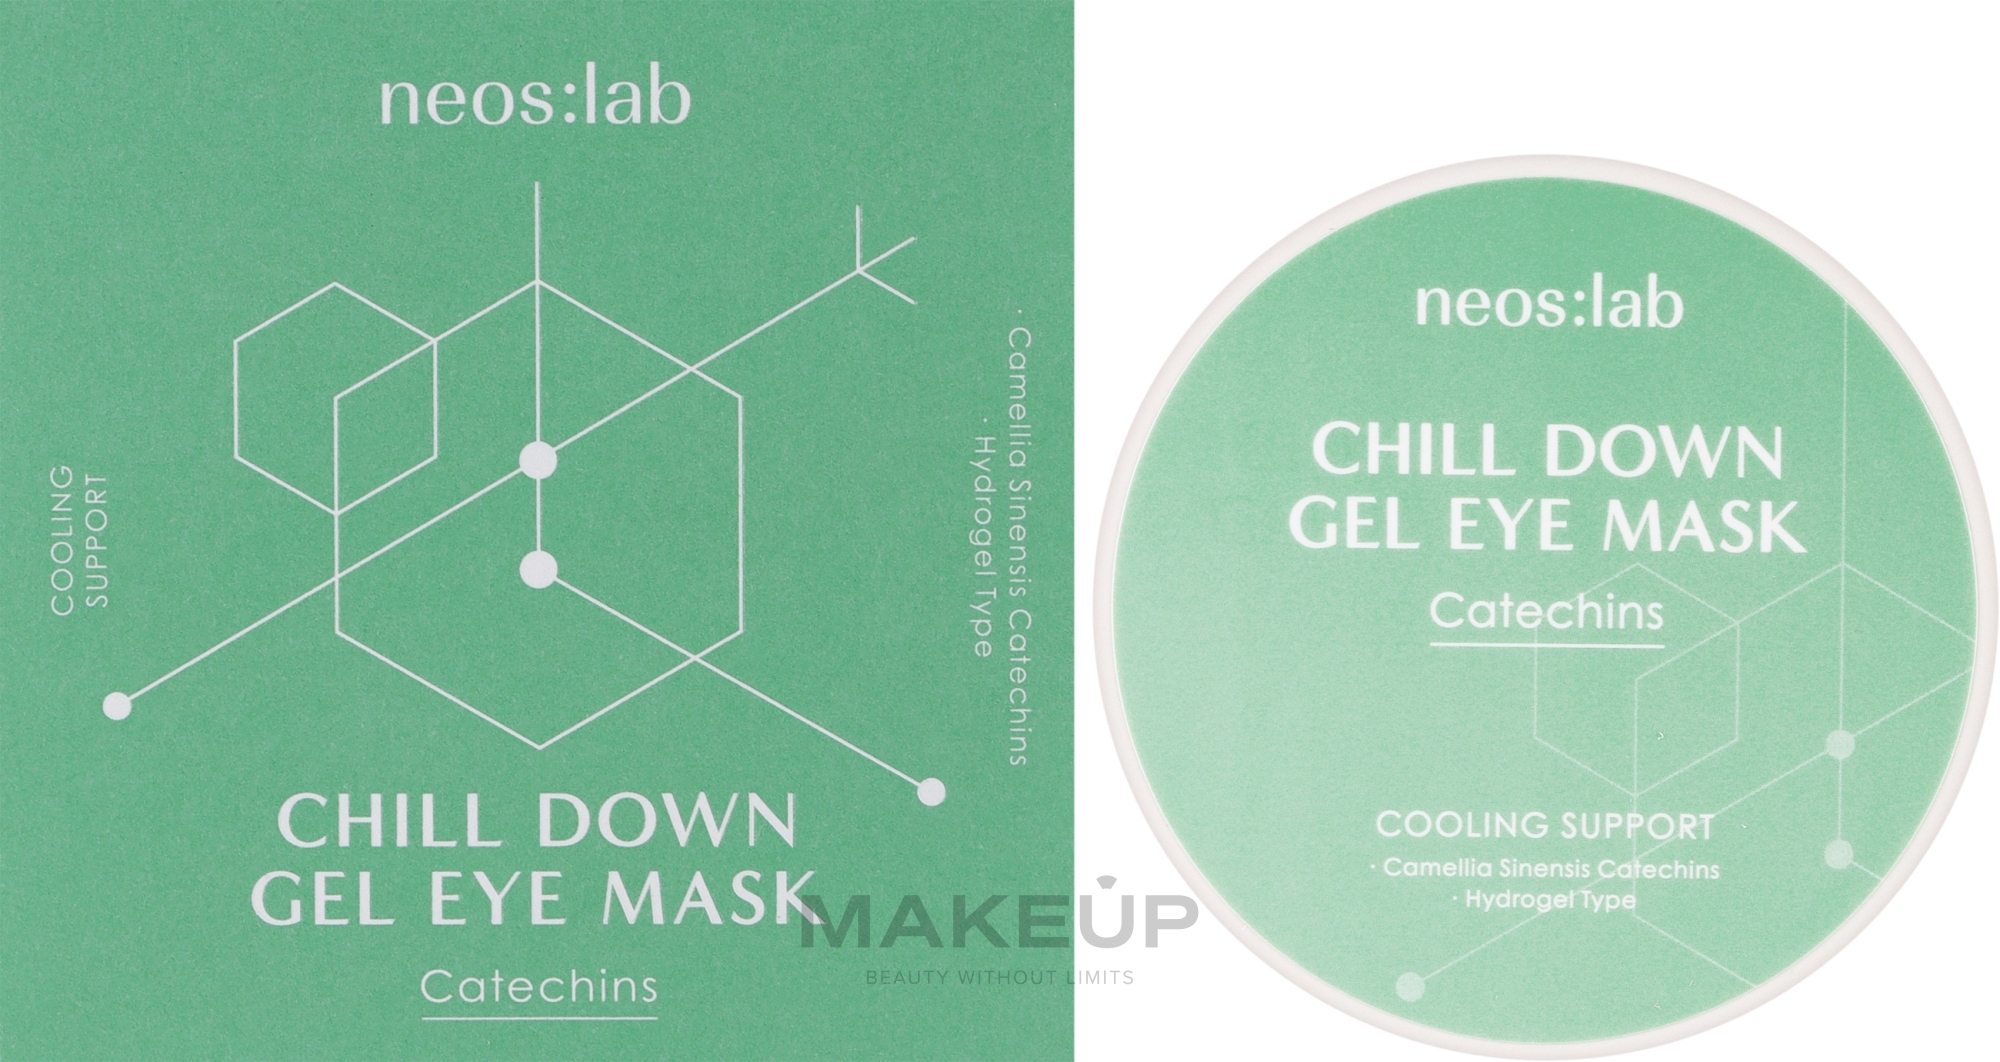 Hydrogel Eye Patches with Green Tea & Adenosine - Neos:lab Chill Down Gel Eye Mask Catechins — photo 60 szt.